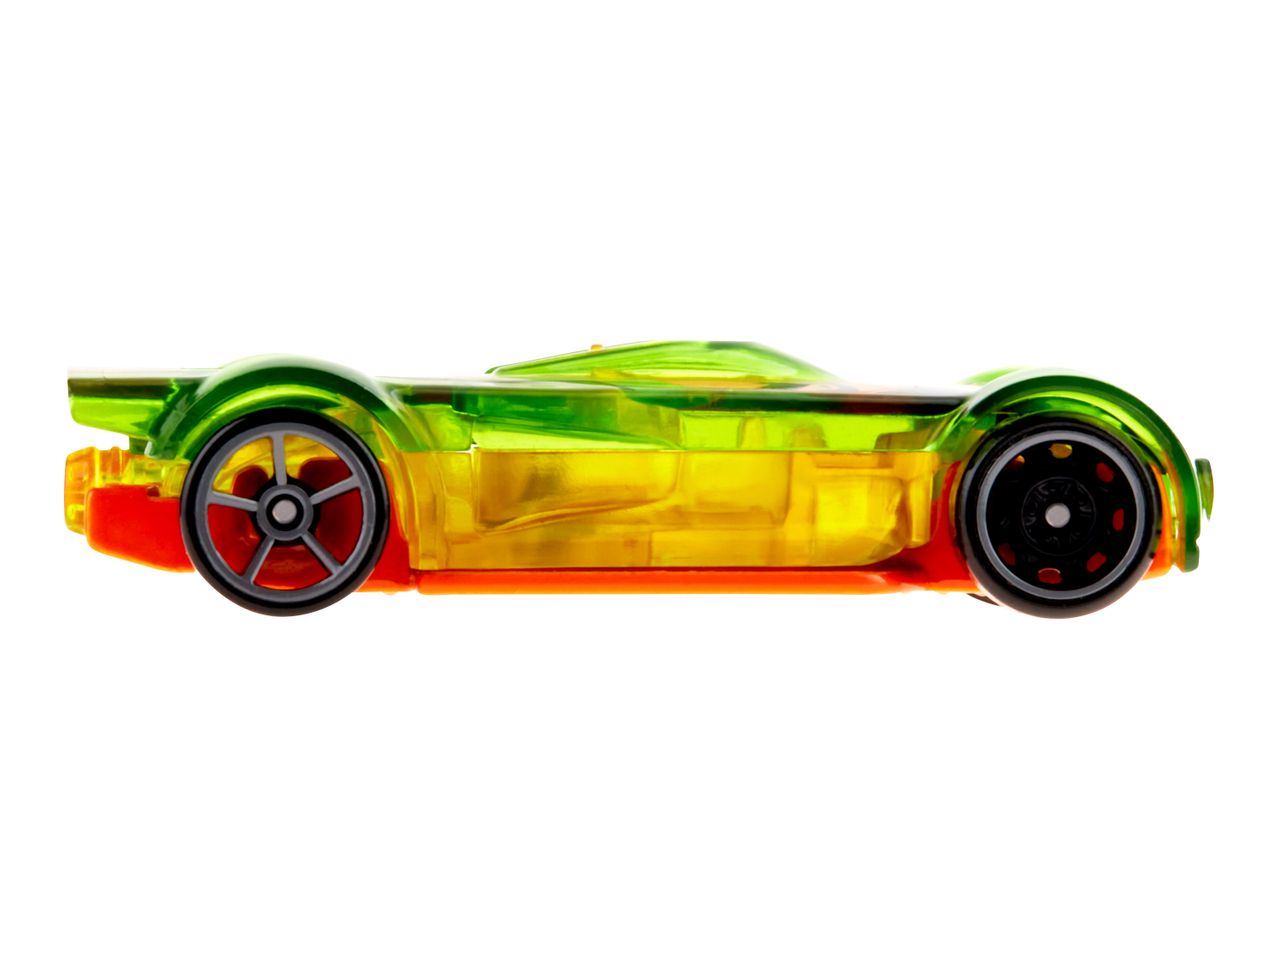 Go to full screen view: Hot Wheels Car - Image 12